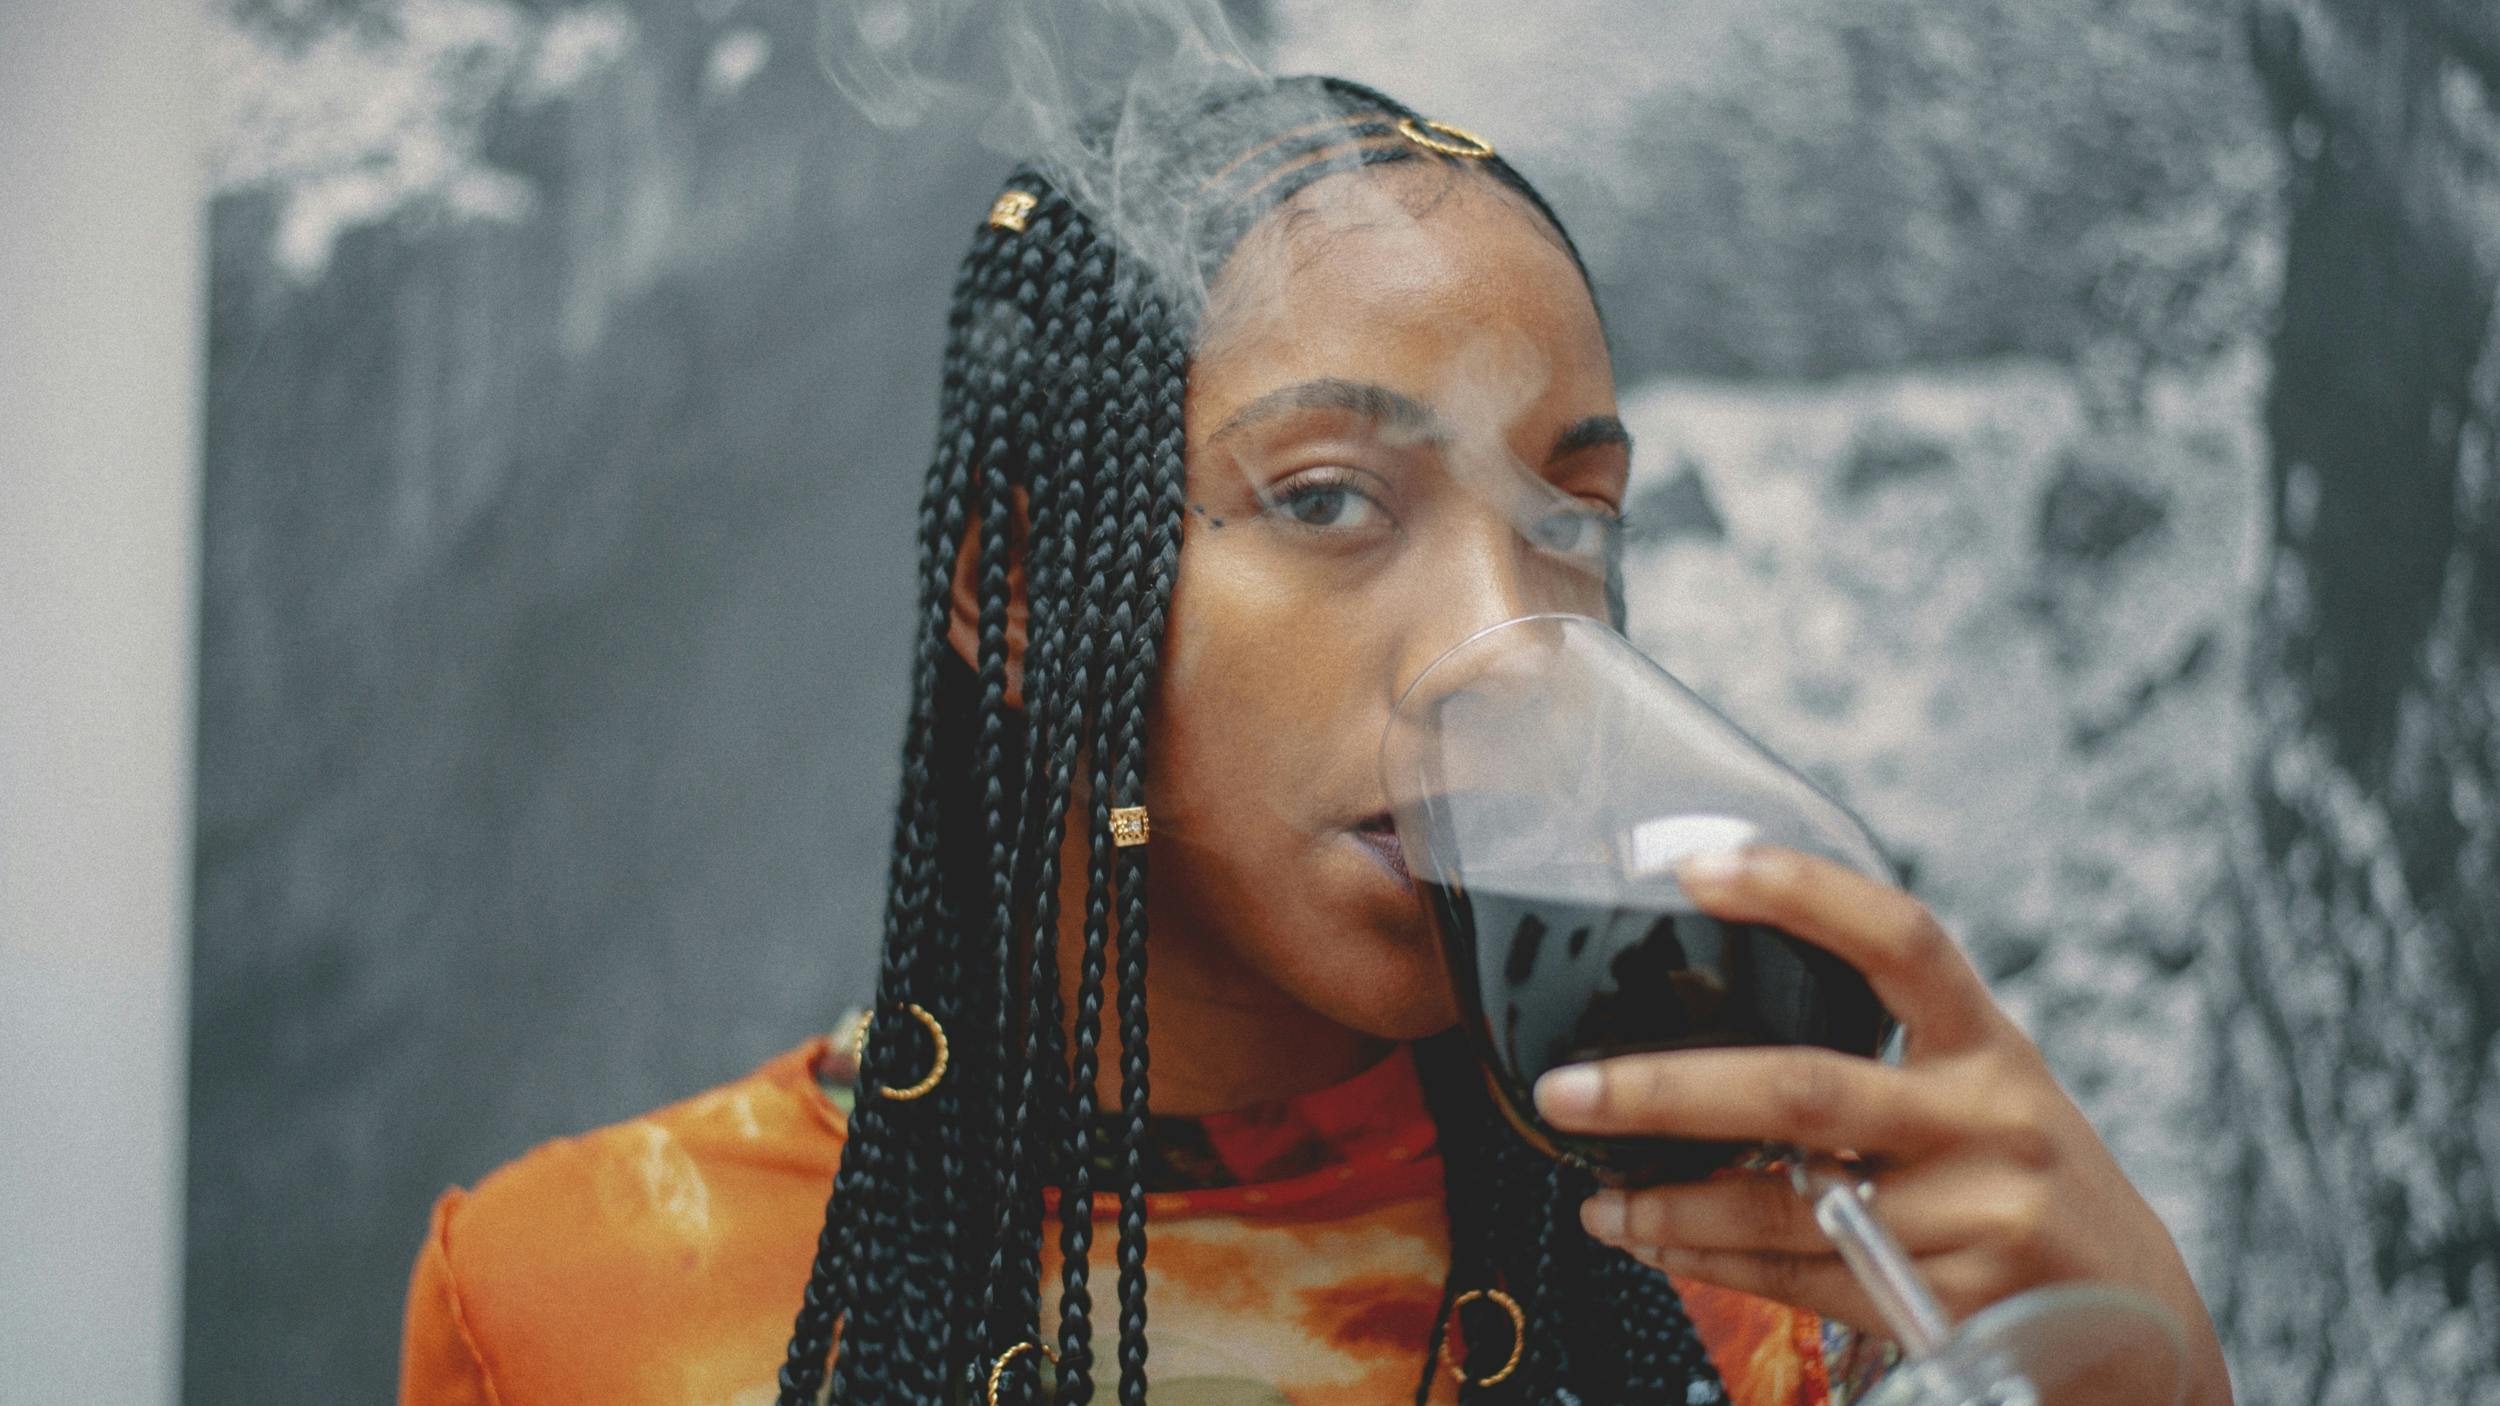 A woman takes a sip of weed wine in a cloud of smoke